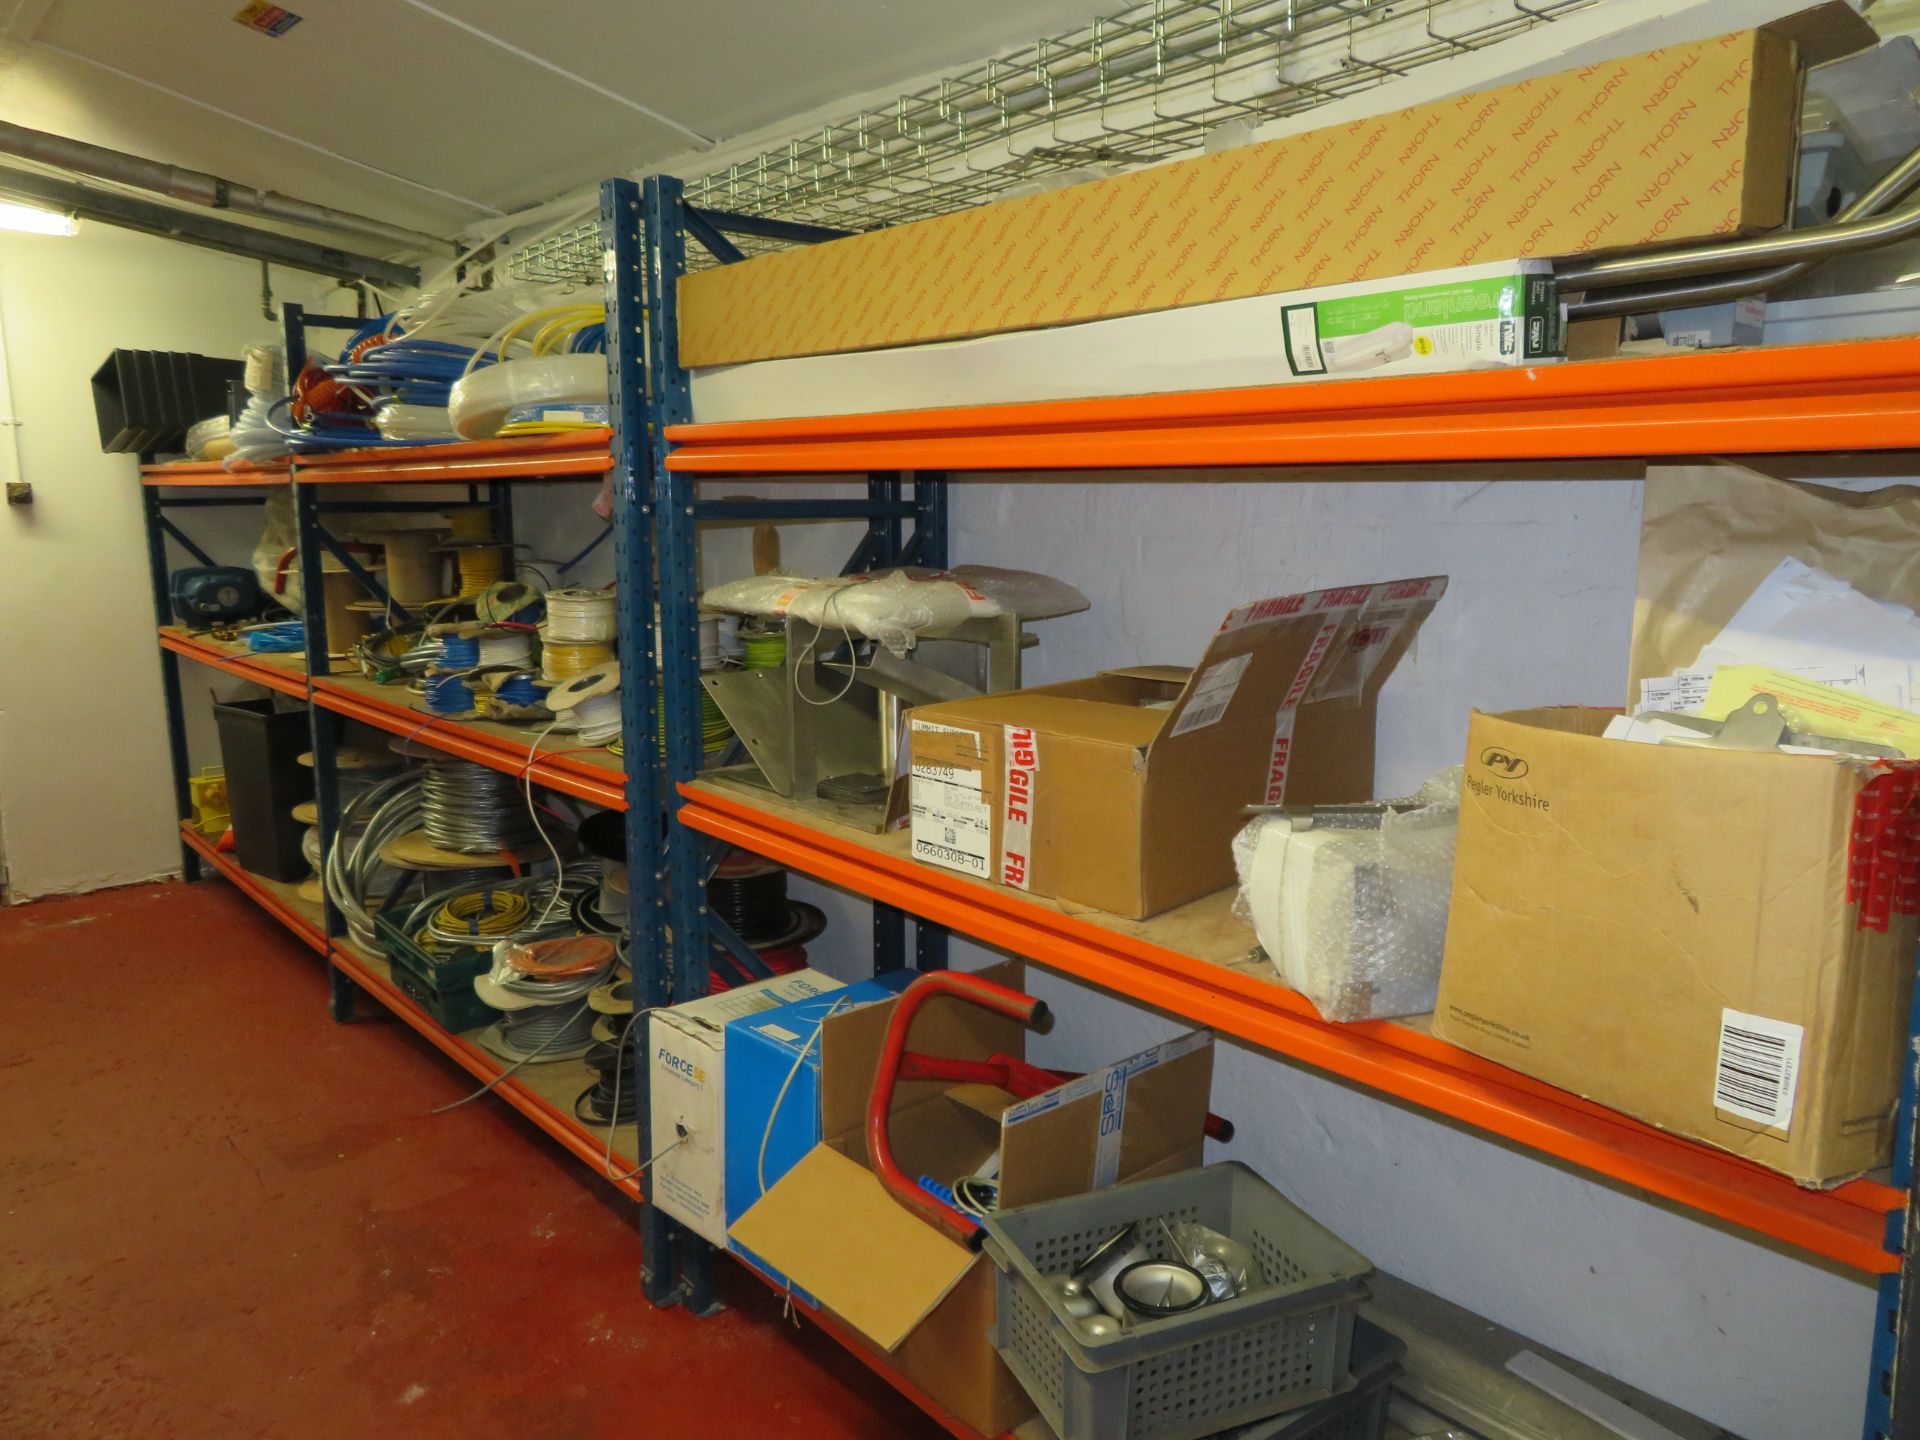 Contents of engineering stores - Image 19 of 22